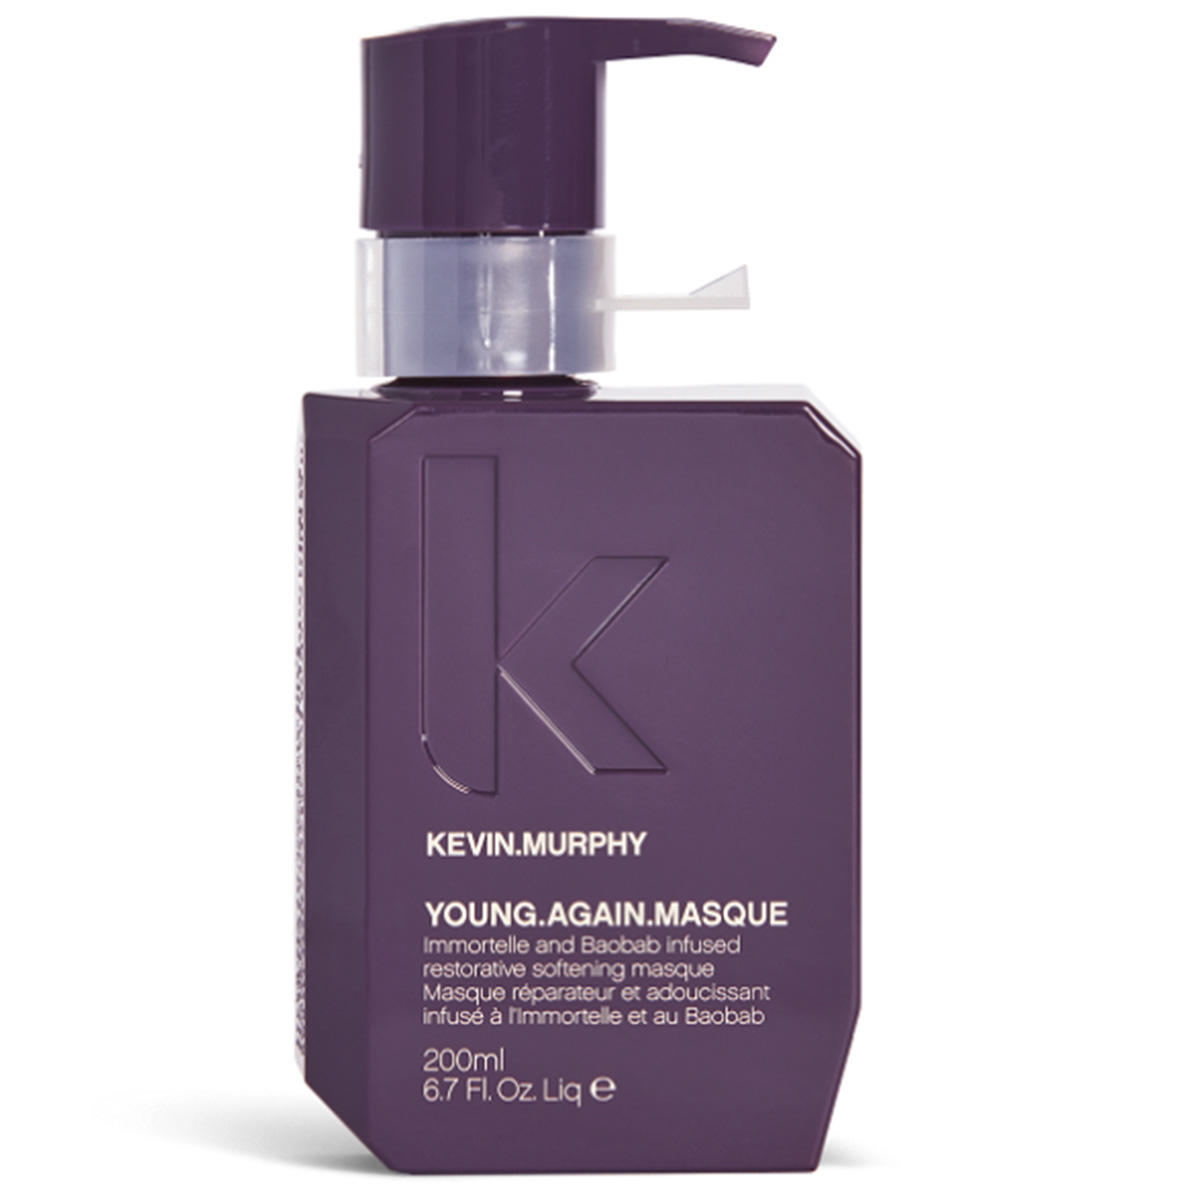 KEVIN.MURPHY YOUNG.AGAIN Masque 200 ml - 1